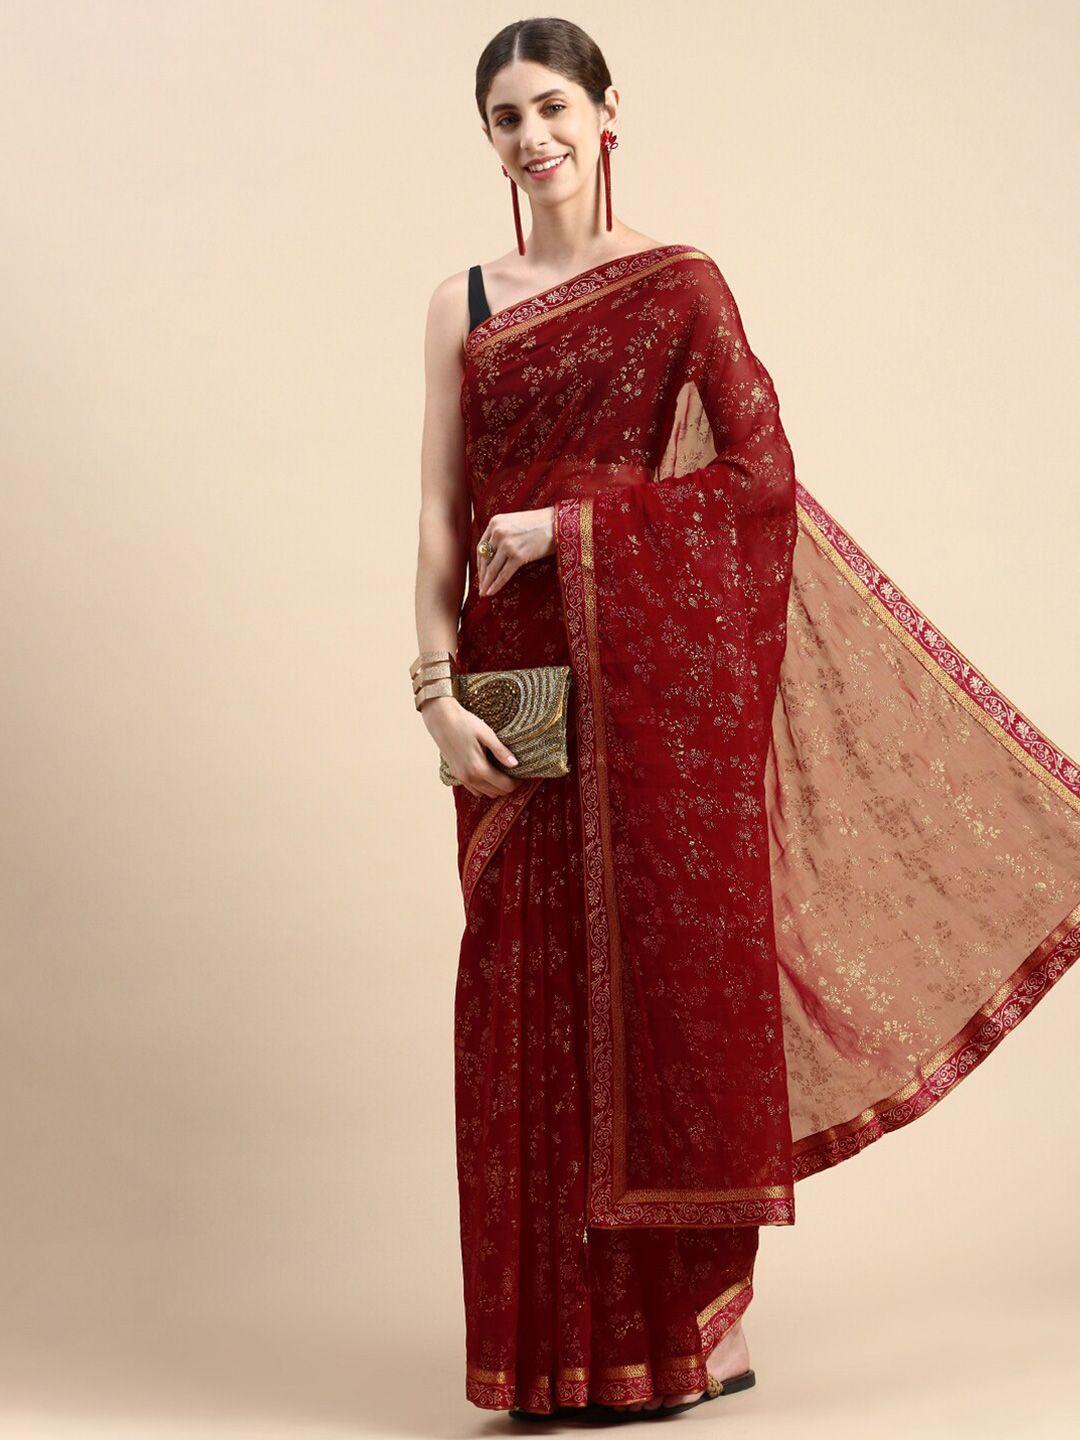 kalini-floral-embellished-beads-and-stones-saree